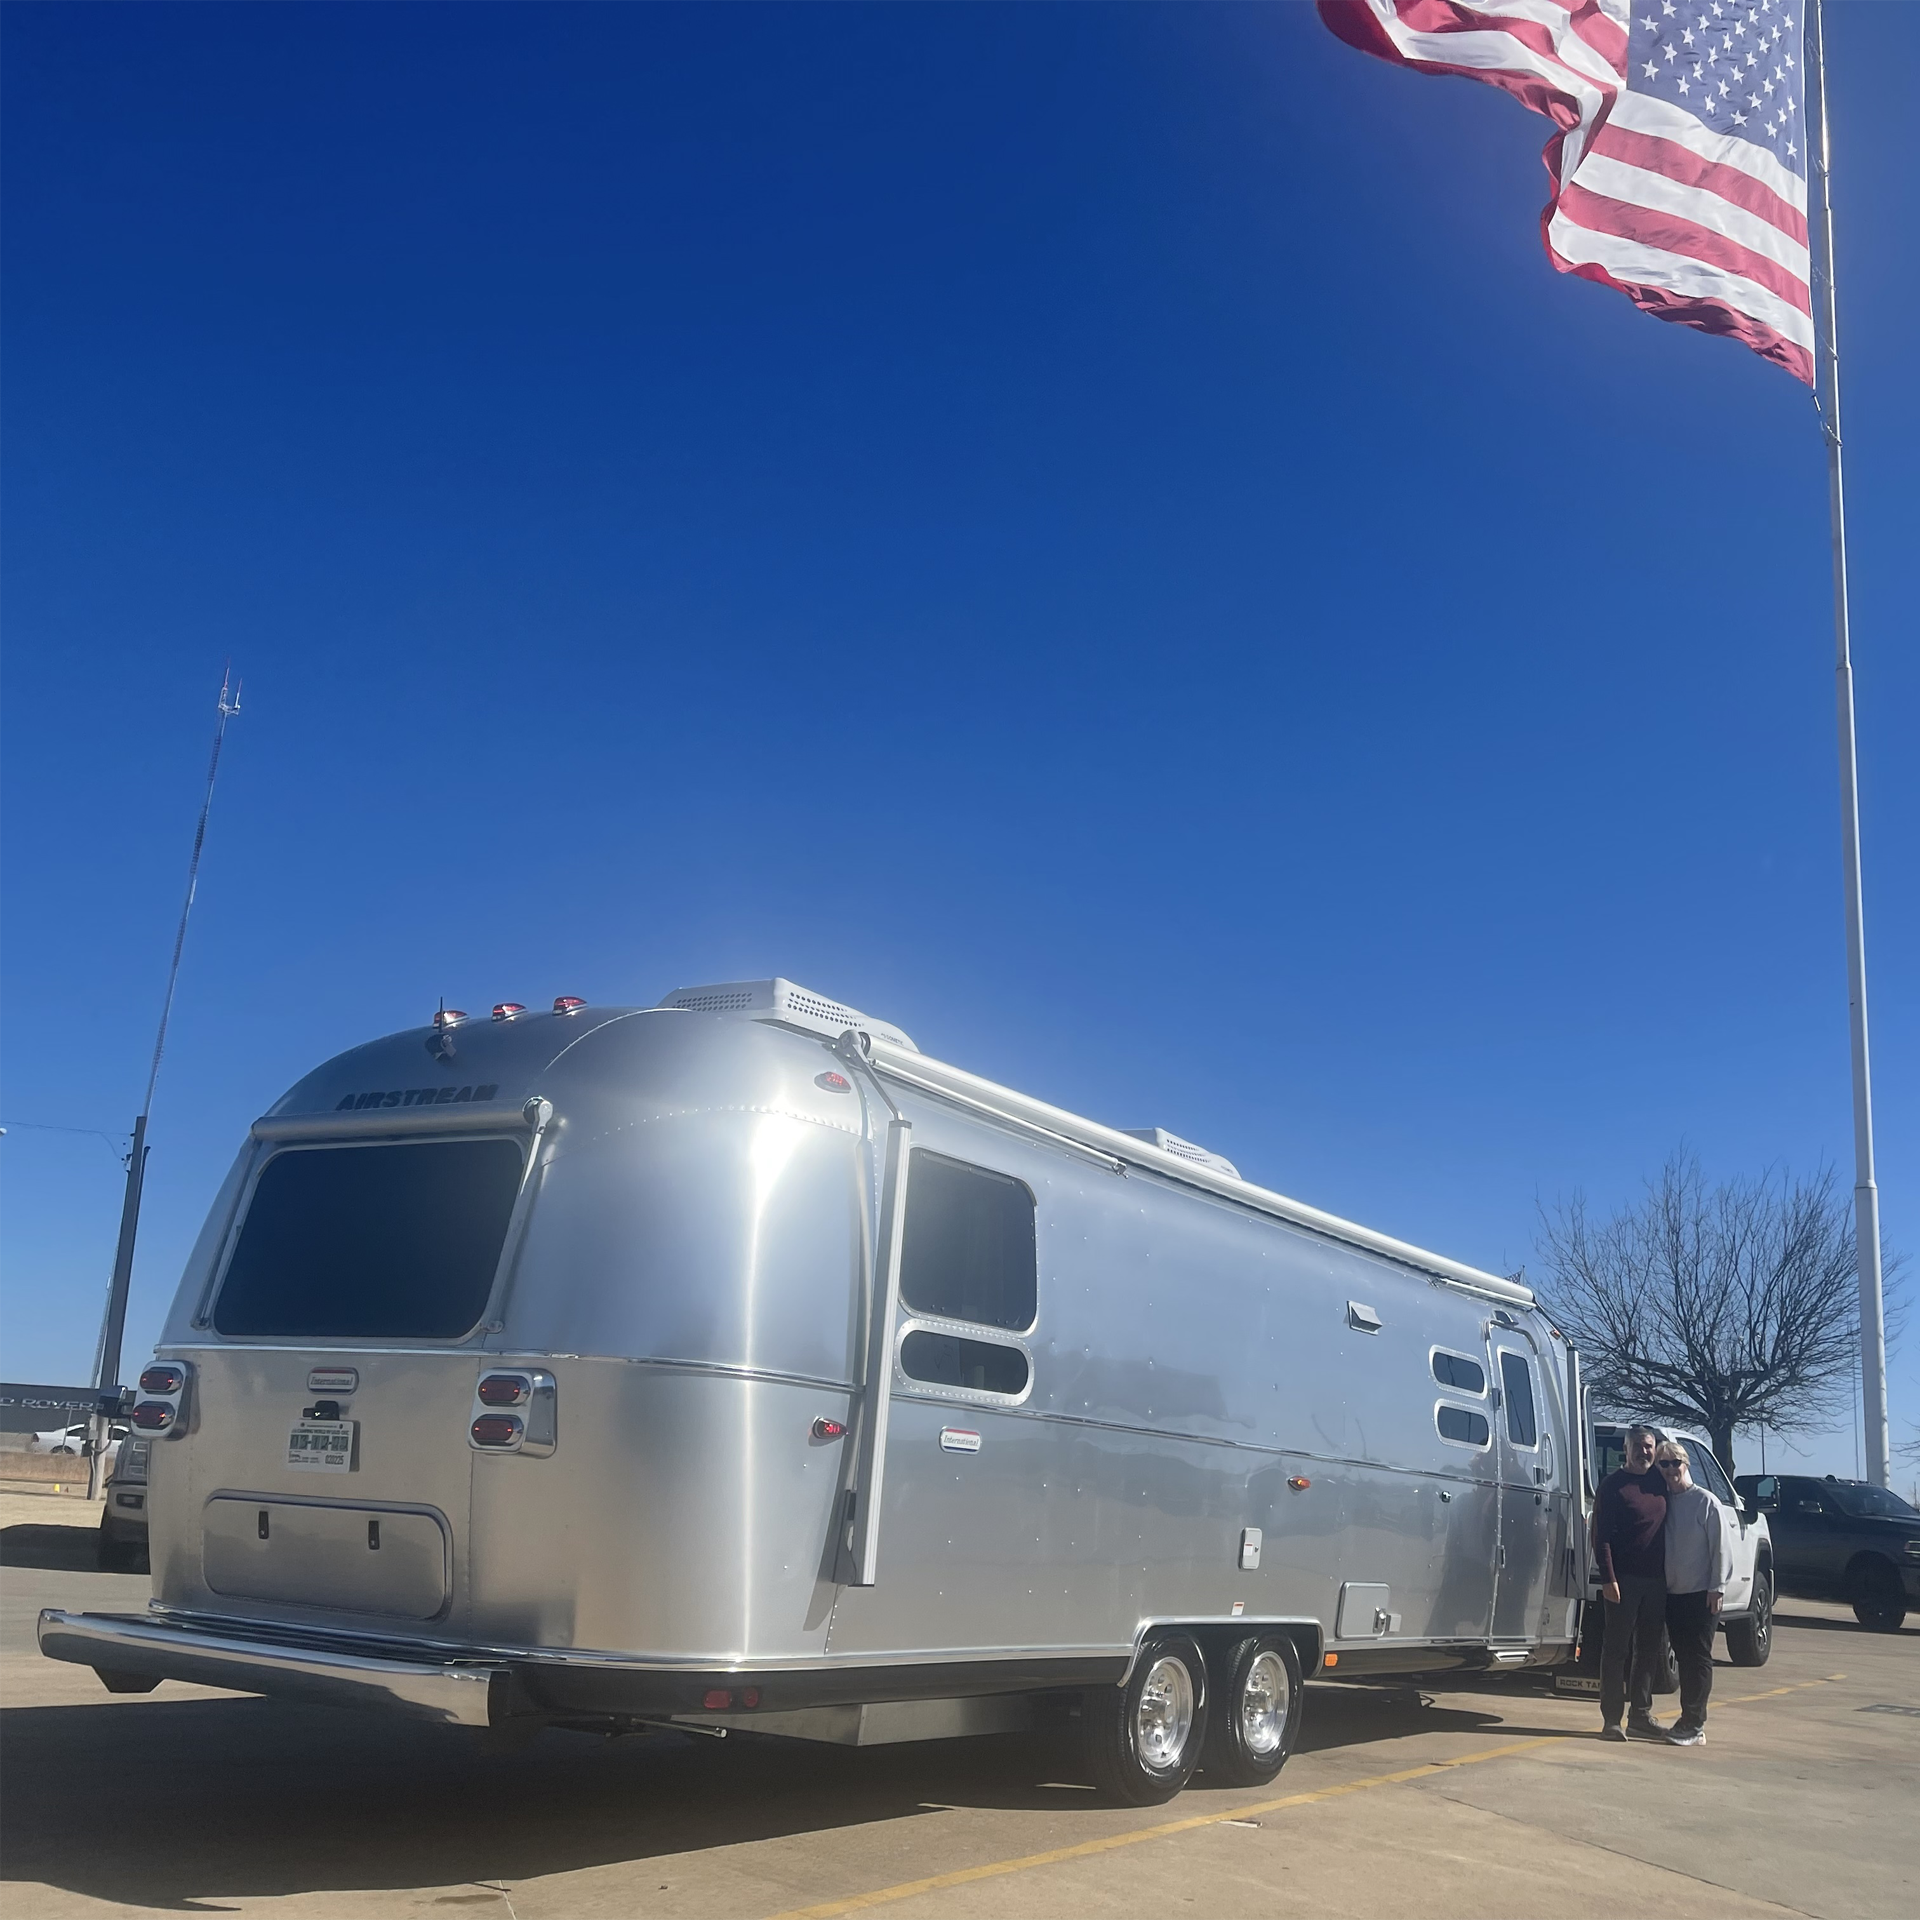 Jim and Susan smiling for a picture next to their new Airstream International Travel Trailer camper with the American flag flying in the blue skyat the dealership.